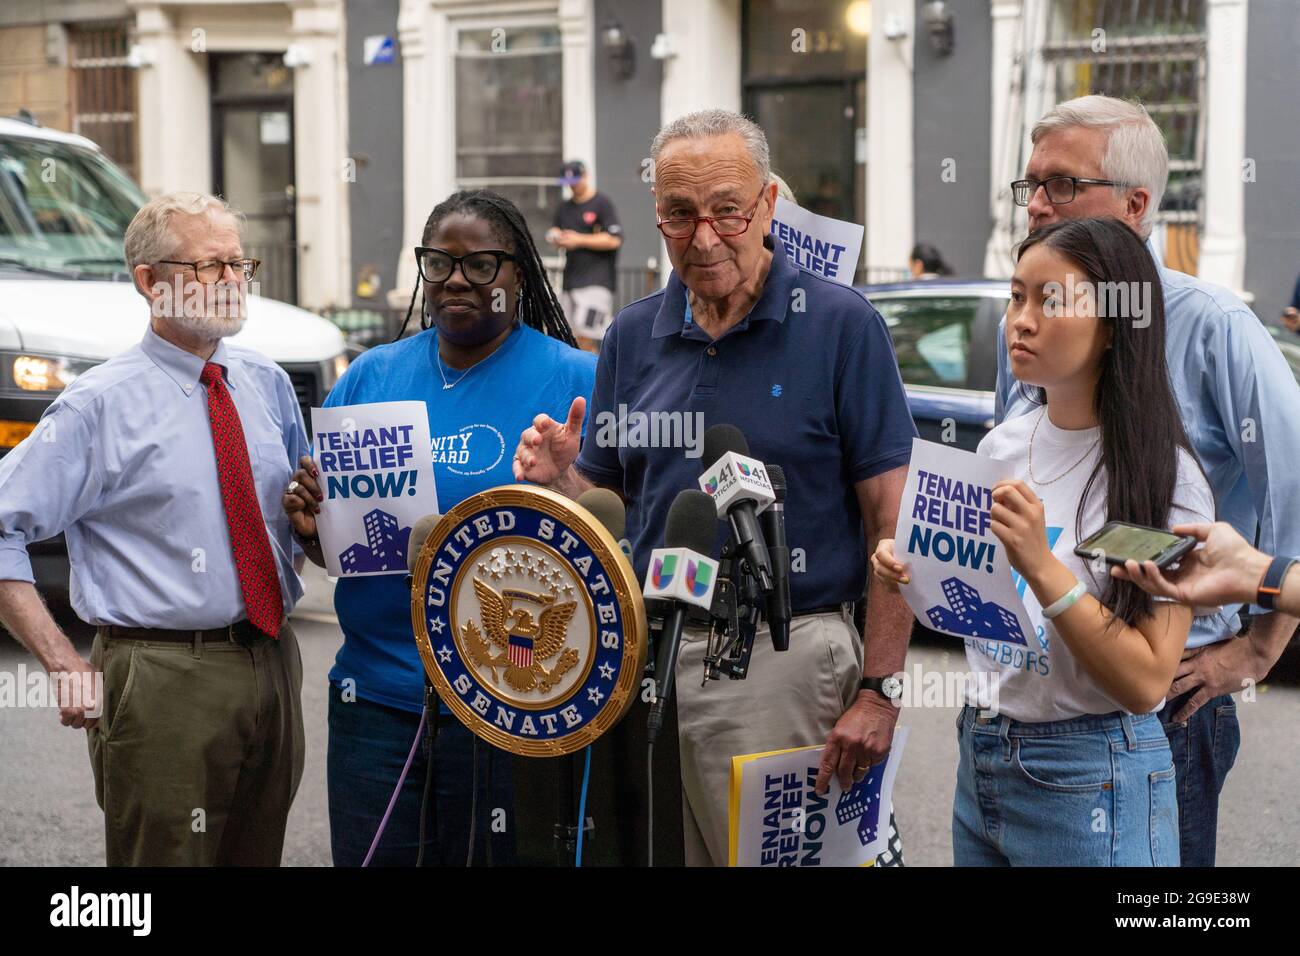 New York, United States. 25th July, 2021. Senate Majority Leader Senator Chuck Schumer (D-NY) speaks at a press conference at Hells Kitchen in New York City.Standing alongside NY State Senator Brian Kavanagh, Assembly Member Richard Gottfried and community rent activists Sen. Chuck Schumer says that the Cuomo administration is failing to disburse the $2.4 billion in rent relief meant for New York that could be lost at the end of September if state doesn't release the money to needy tenants who were hit hard during the covid-19 pandemic. Credit: SOPA Images Limited/Alamy Live News Stock Photo